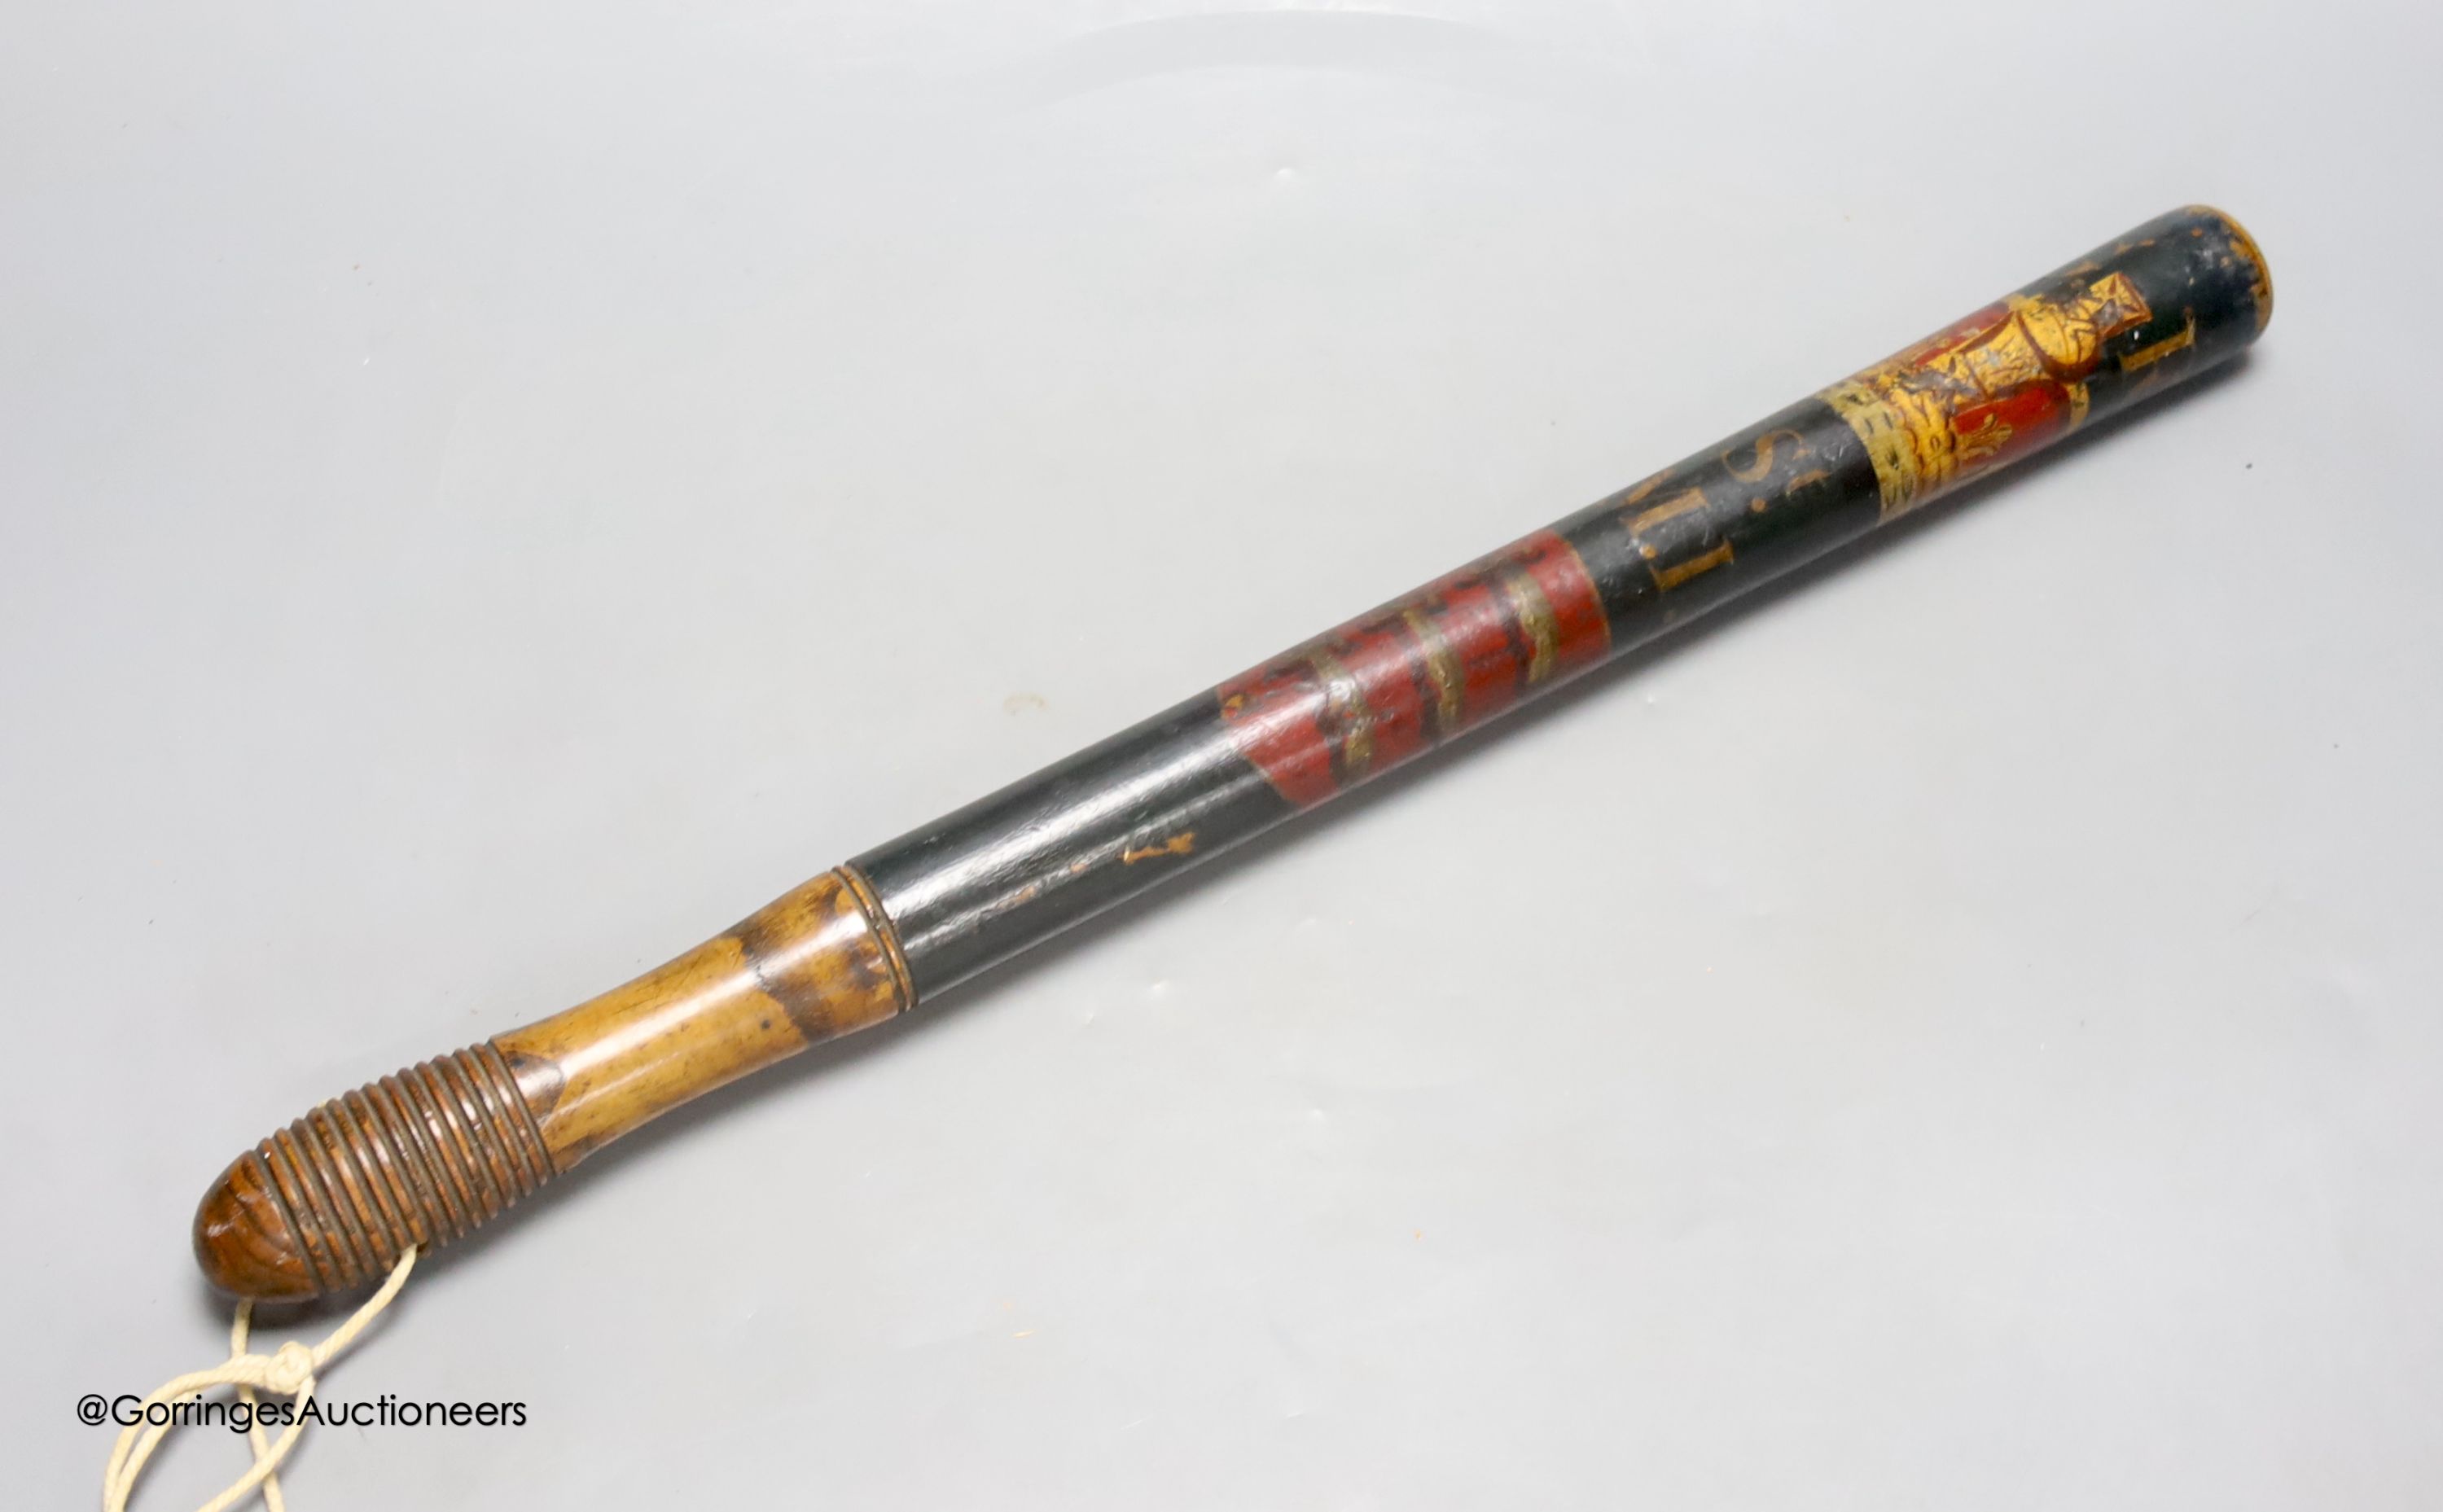 A 19th century painted constabulary truncheon, 50cm